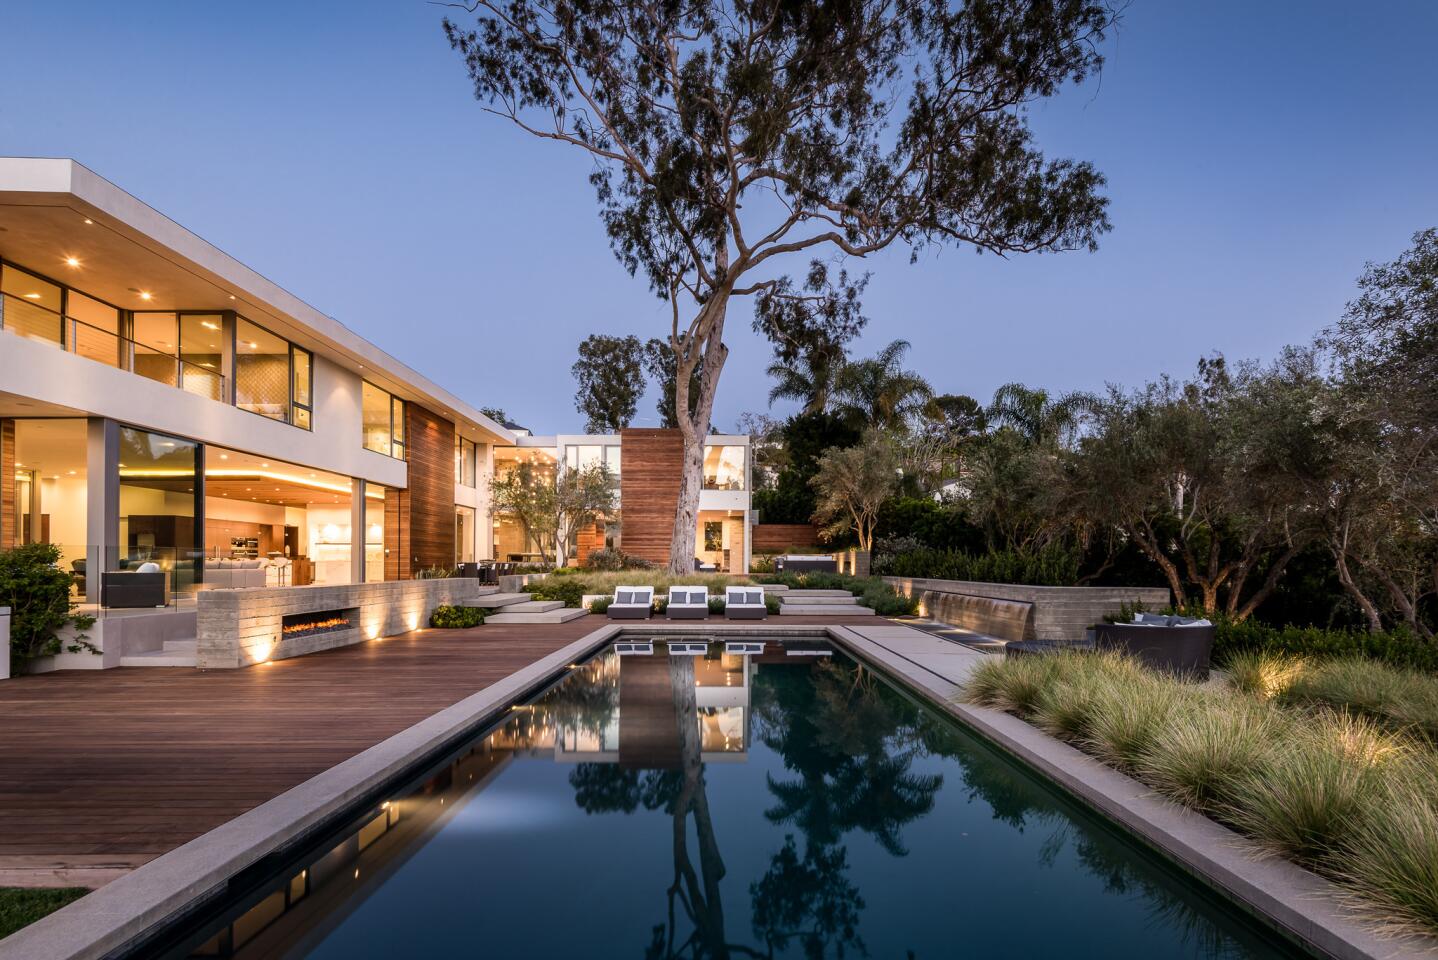 Board-form concrete, expanses of glass and modular shapes form the clean, contemporary shell of this newly built estate in Pacific Palisades. Listed for $26.75 million, the three-story house features nearly 14,000 square feet of living space, eight bedrooms and 12 bathrooms.